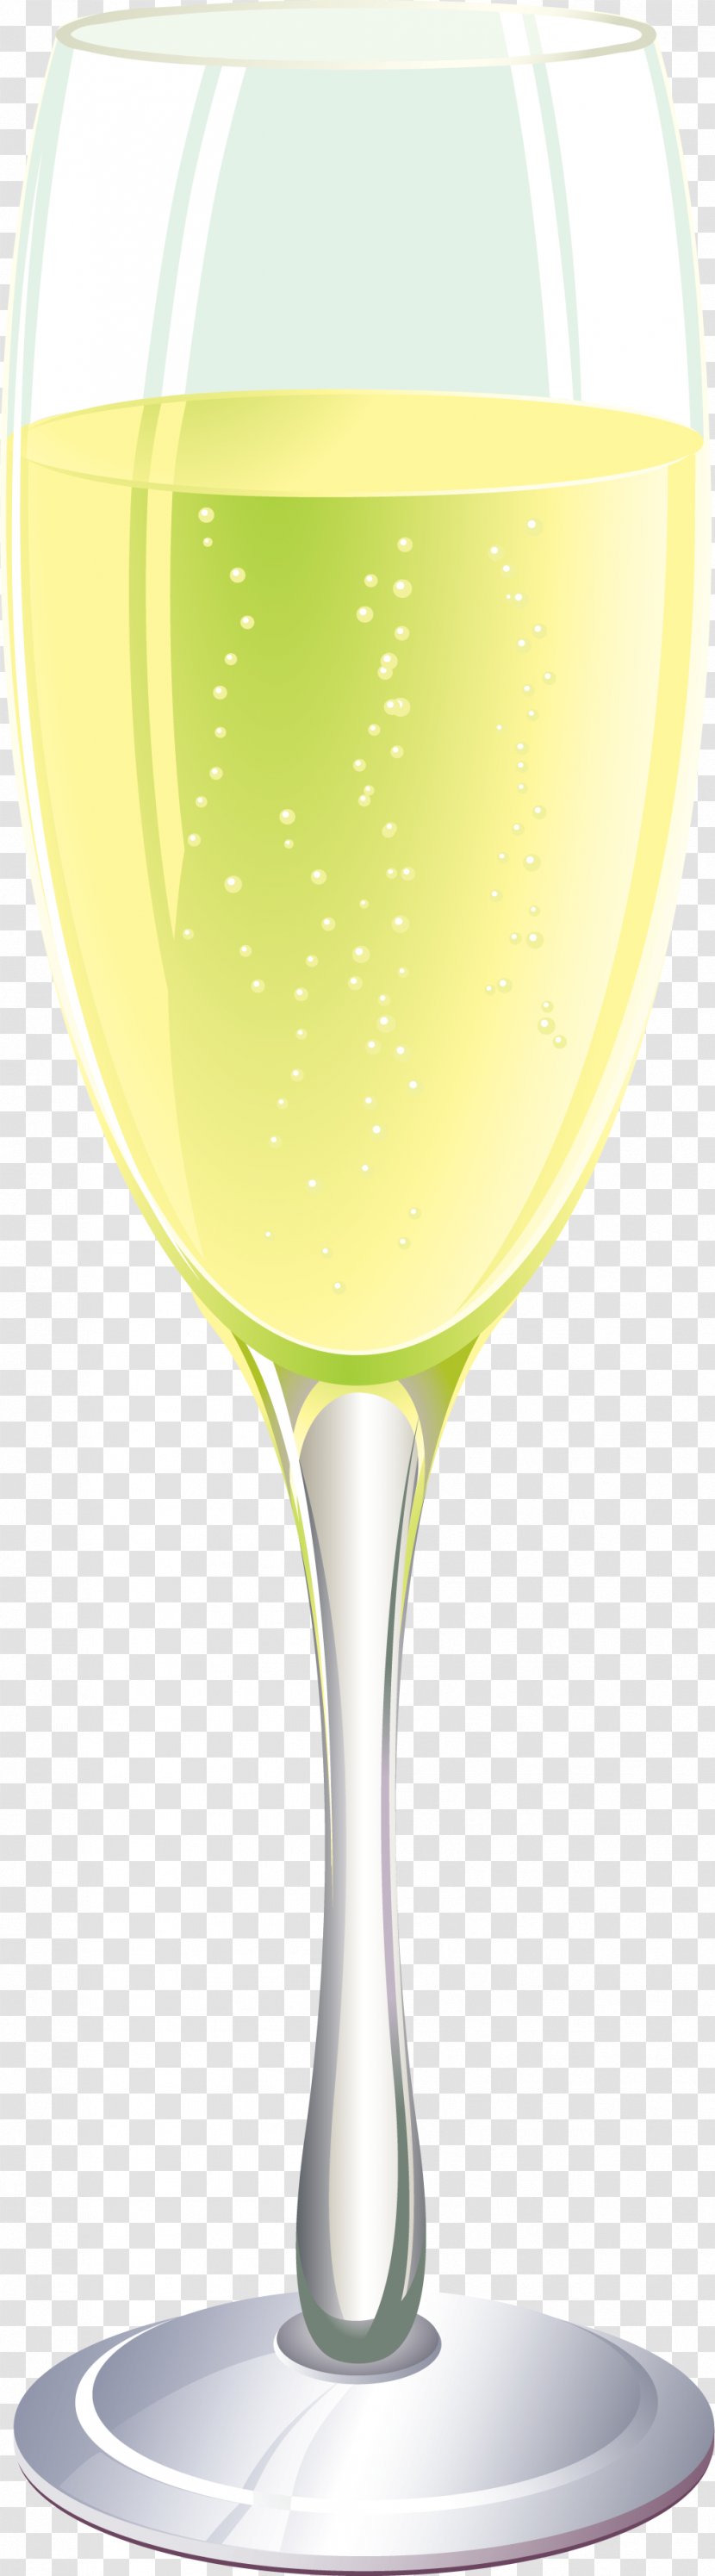 White Wine Glass Cocktail Champagne Beer - Glasses - Image Transparent PNG